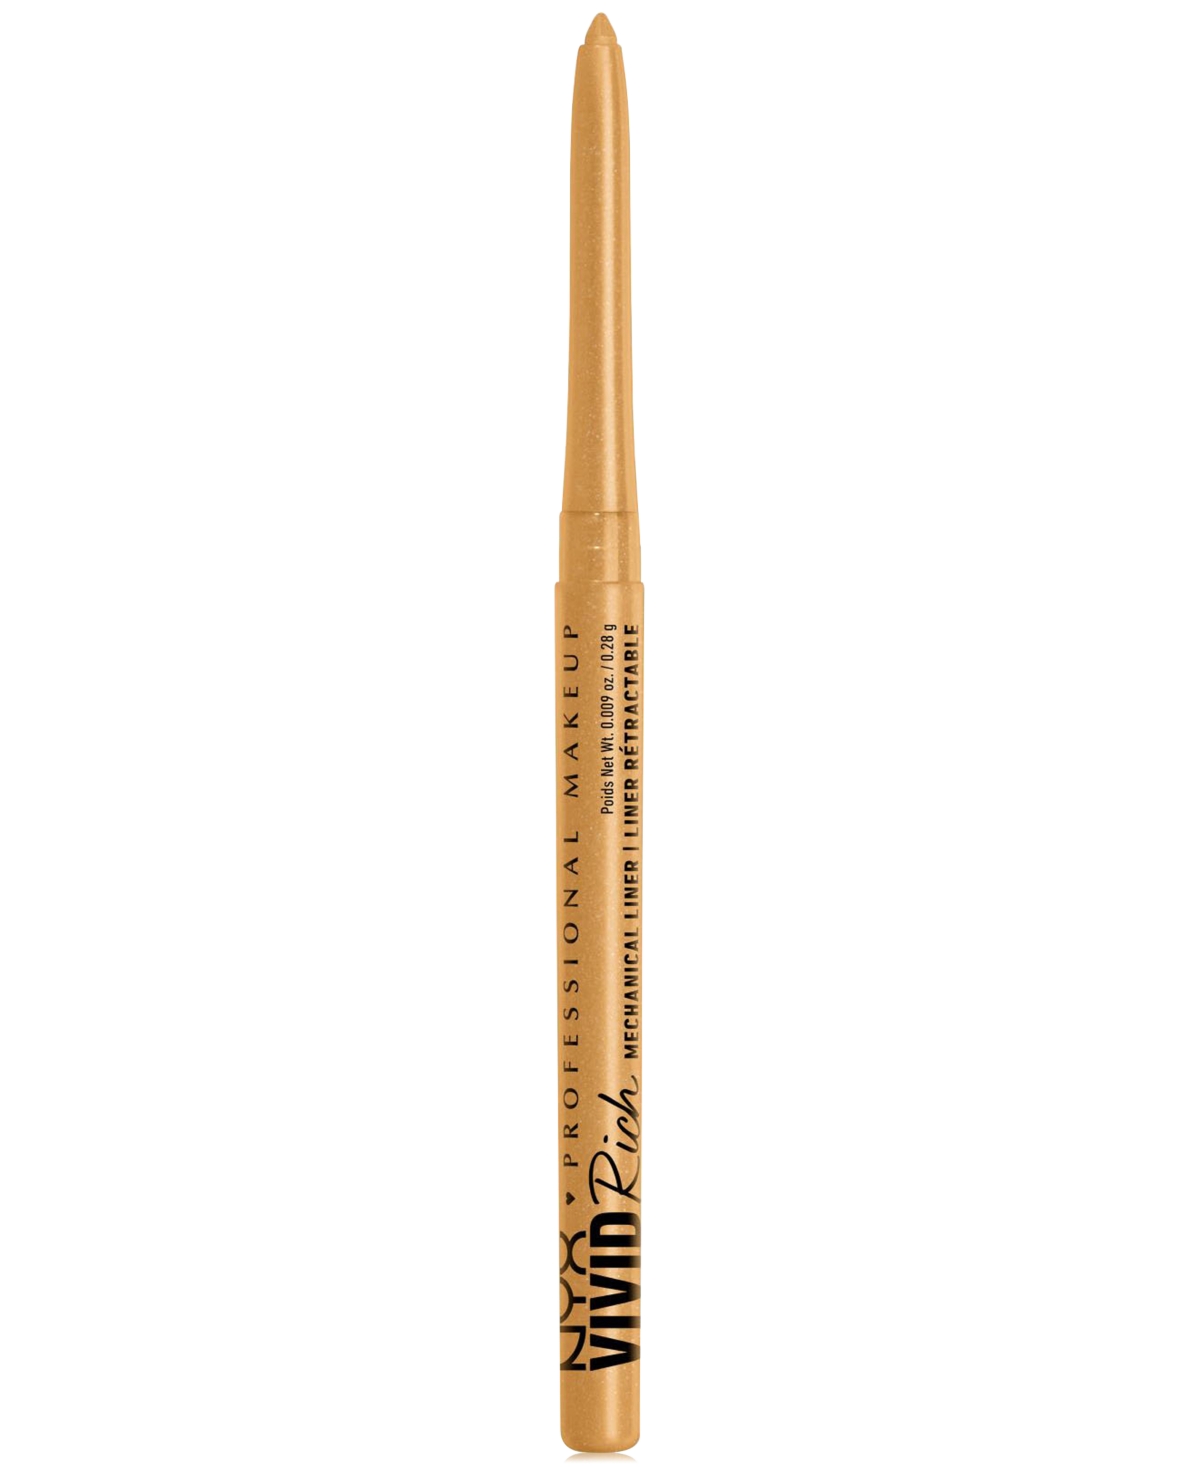 Nyx Professional Makeup Vivid Rich Mechanical Liner Pencil In Amber Stunner